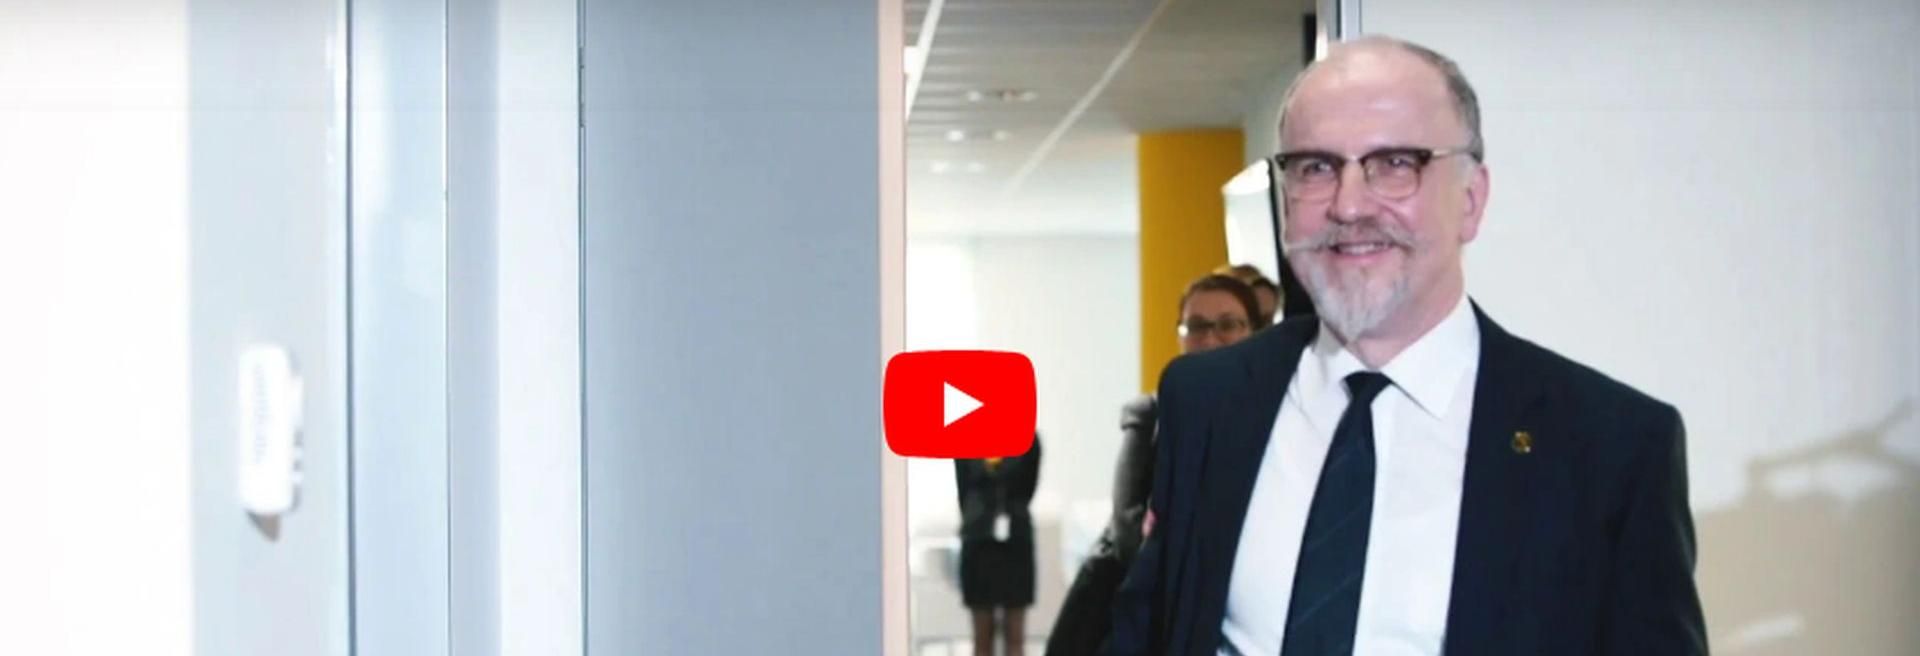 Continental develops driverless car technology from new Budapest office - VIDEO REPORT